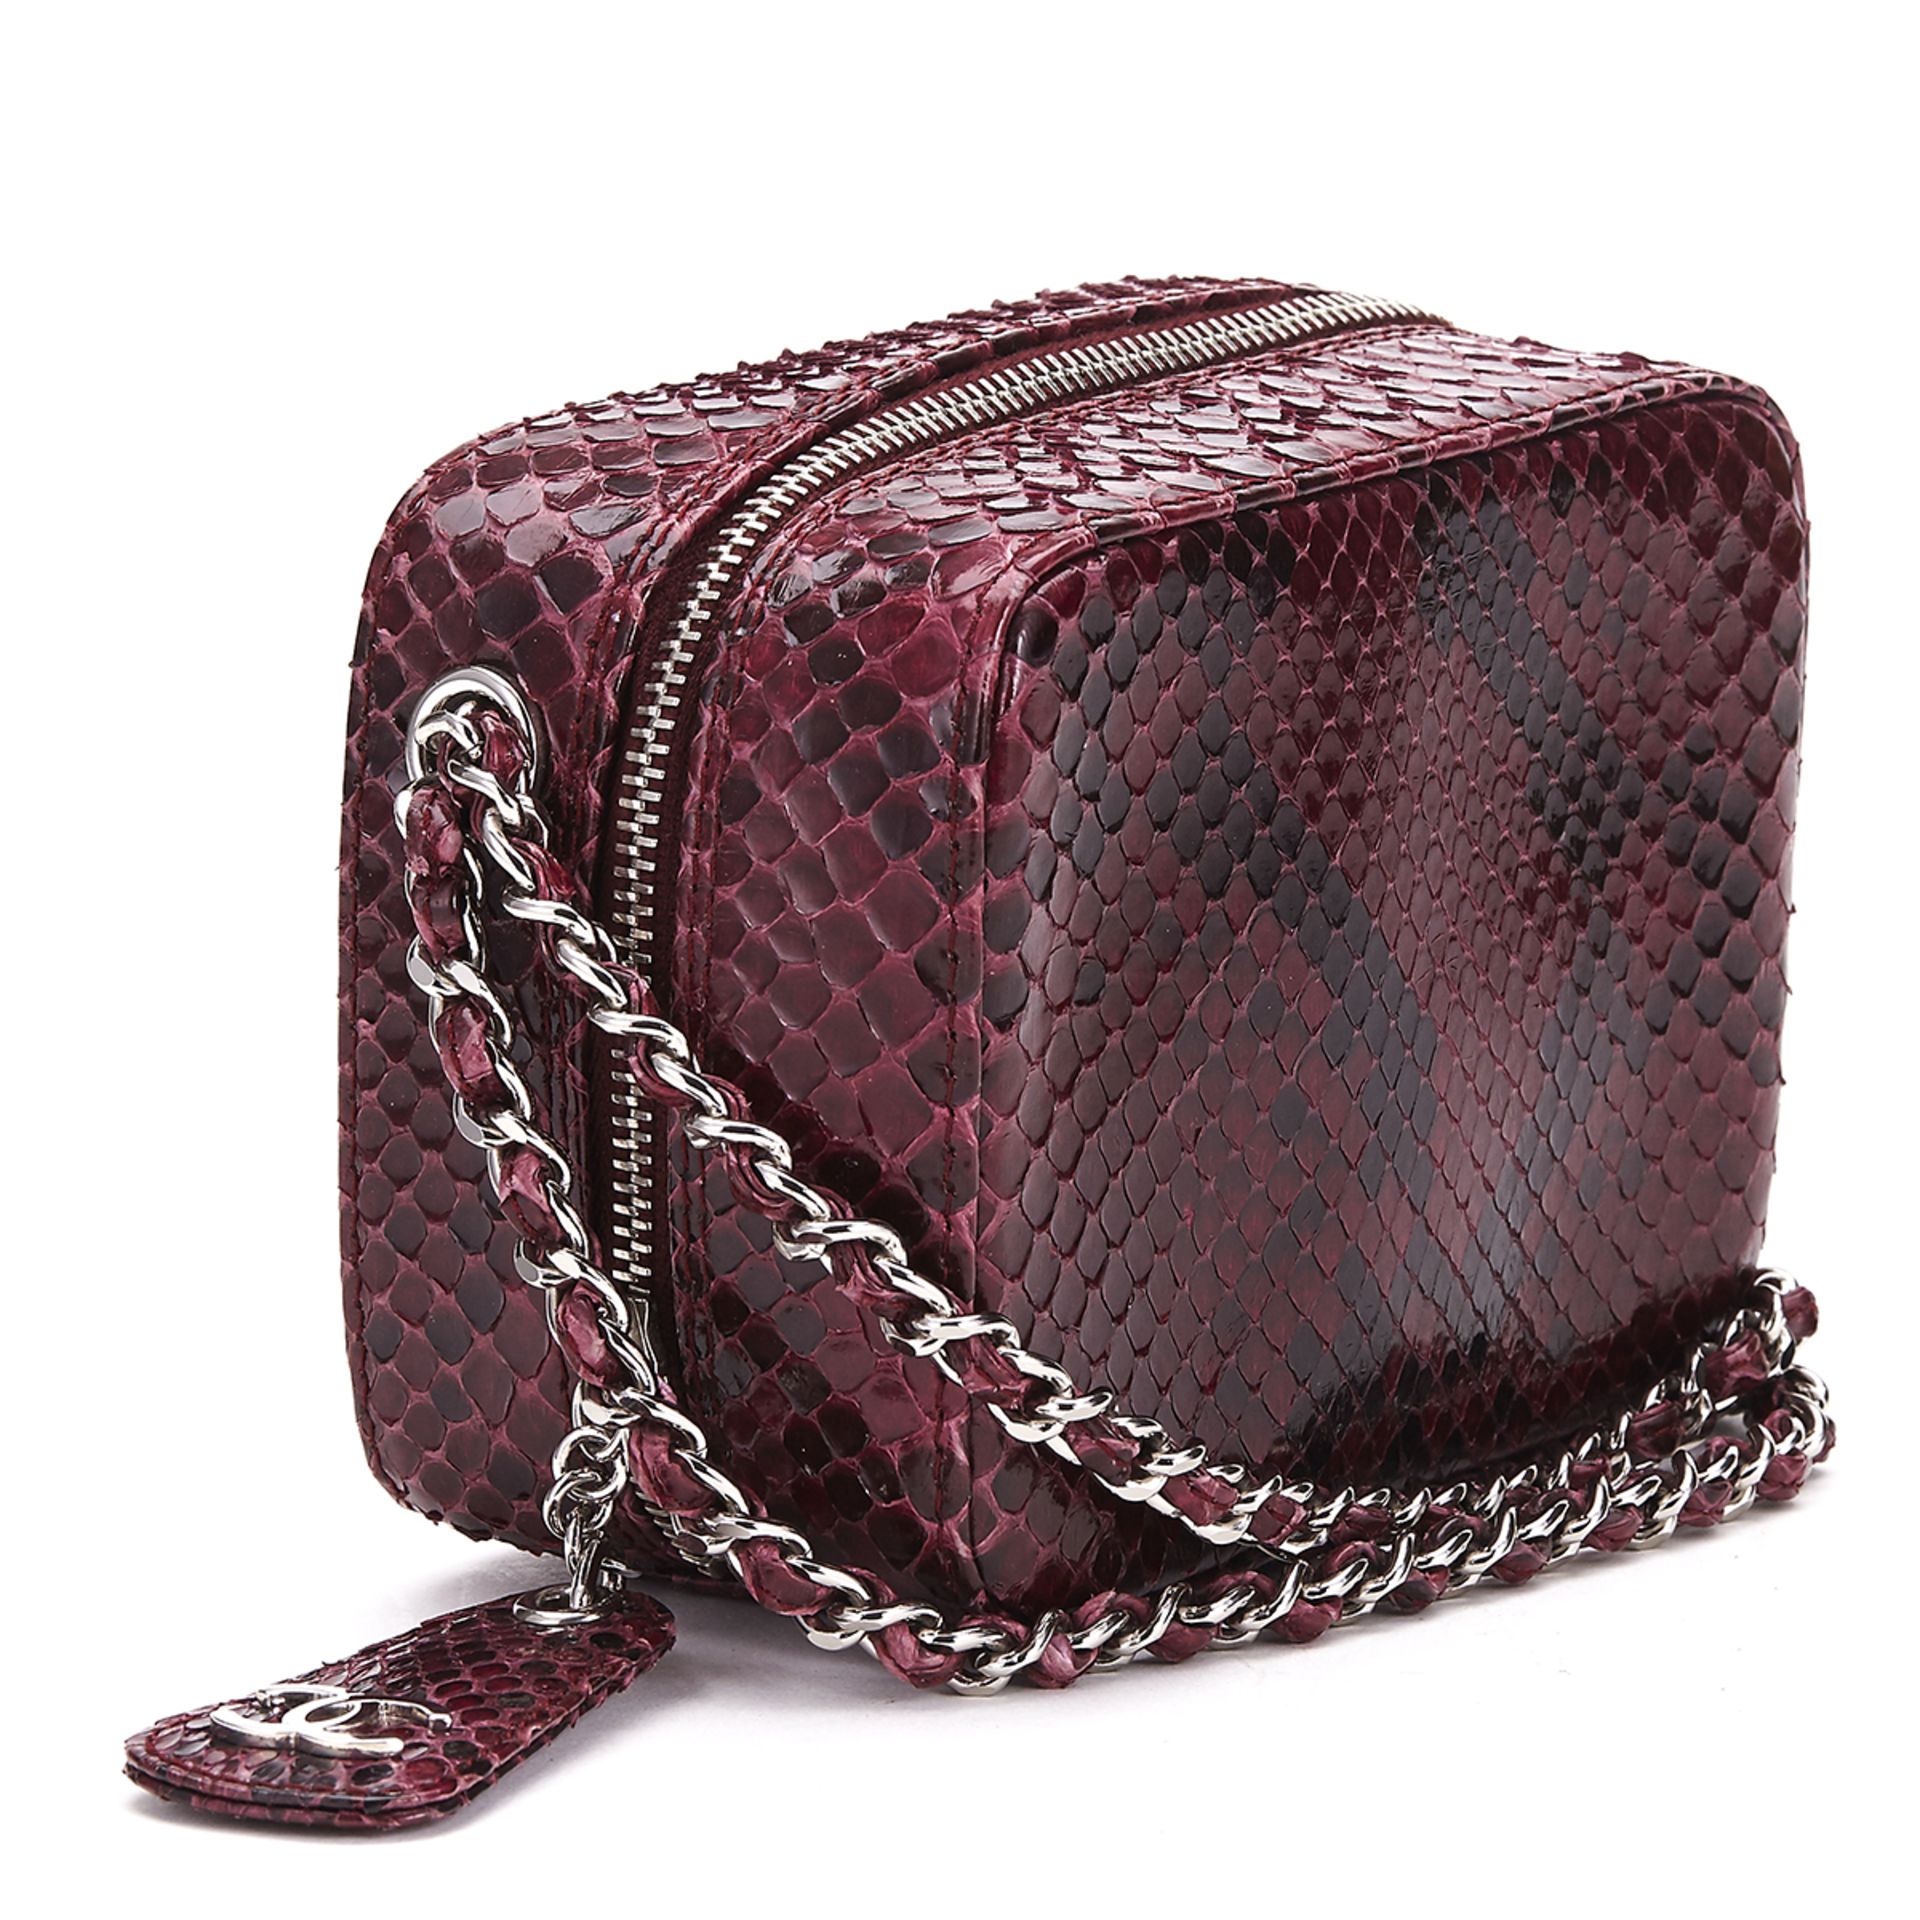 CHANEL Mini Timeless Bag , - Raspberry Python Leather Mini TYPE Clutch   SERIAL NUMBER 6258730 - Image 2 of 9